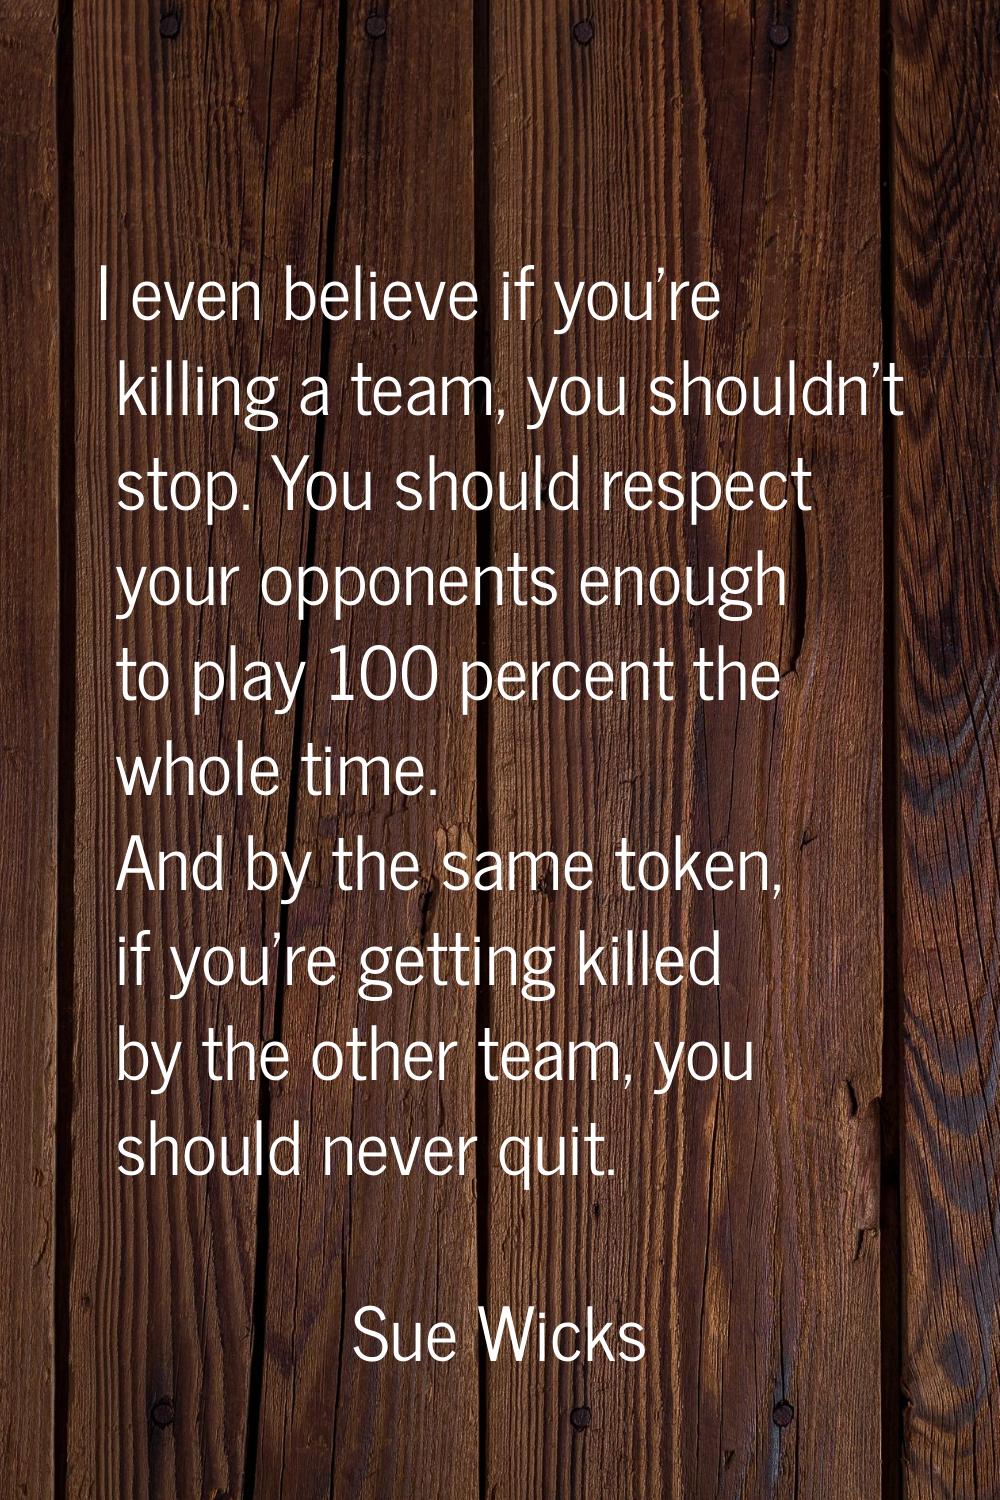 I even believe if you're killing a team, you shouldn't stop. You should respect your opponents enou